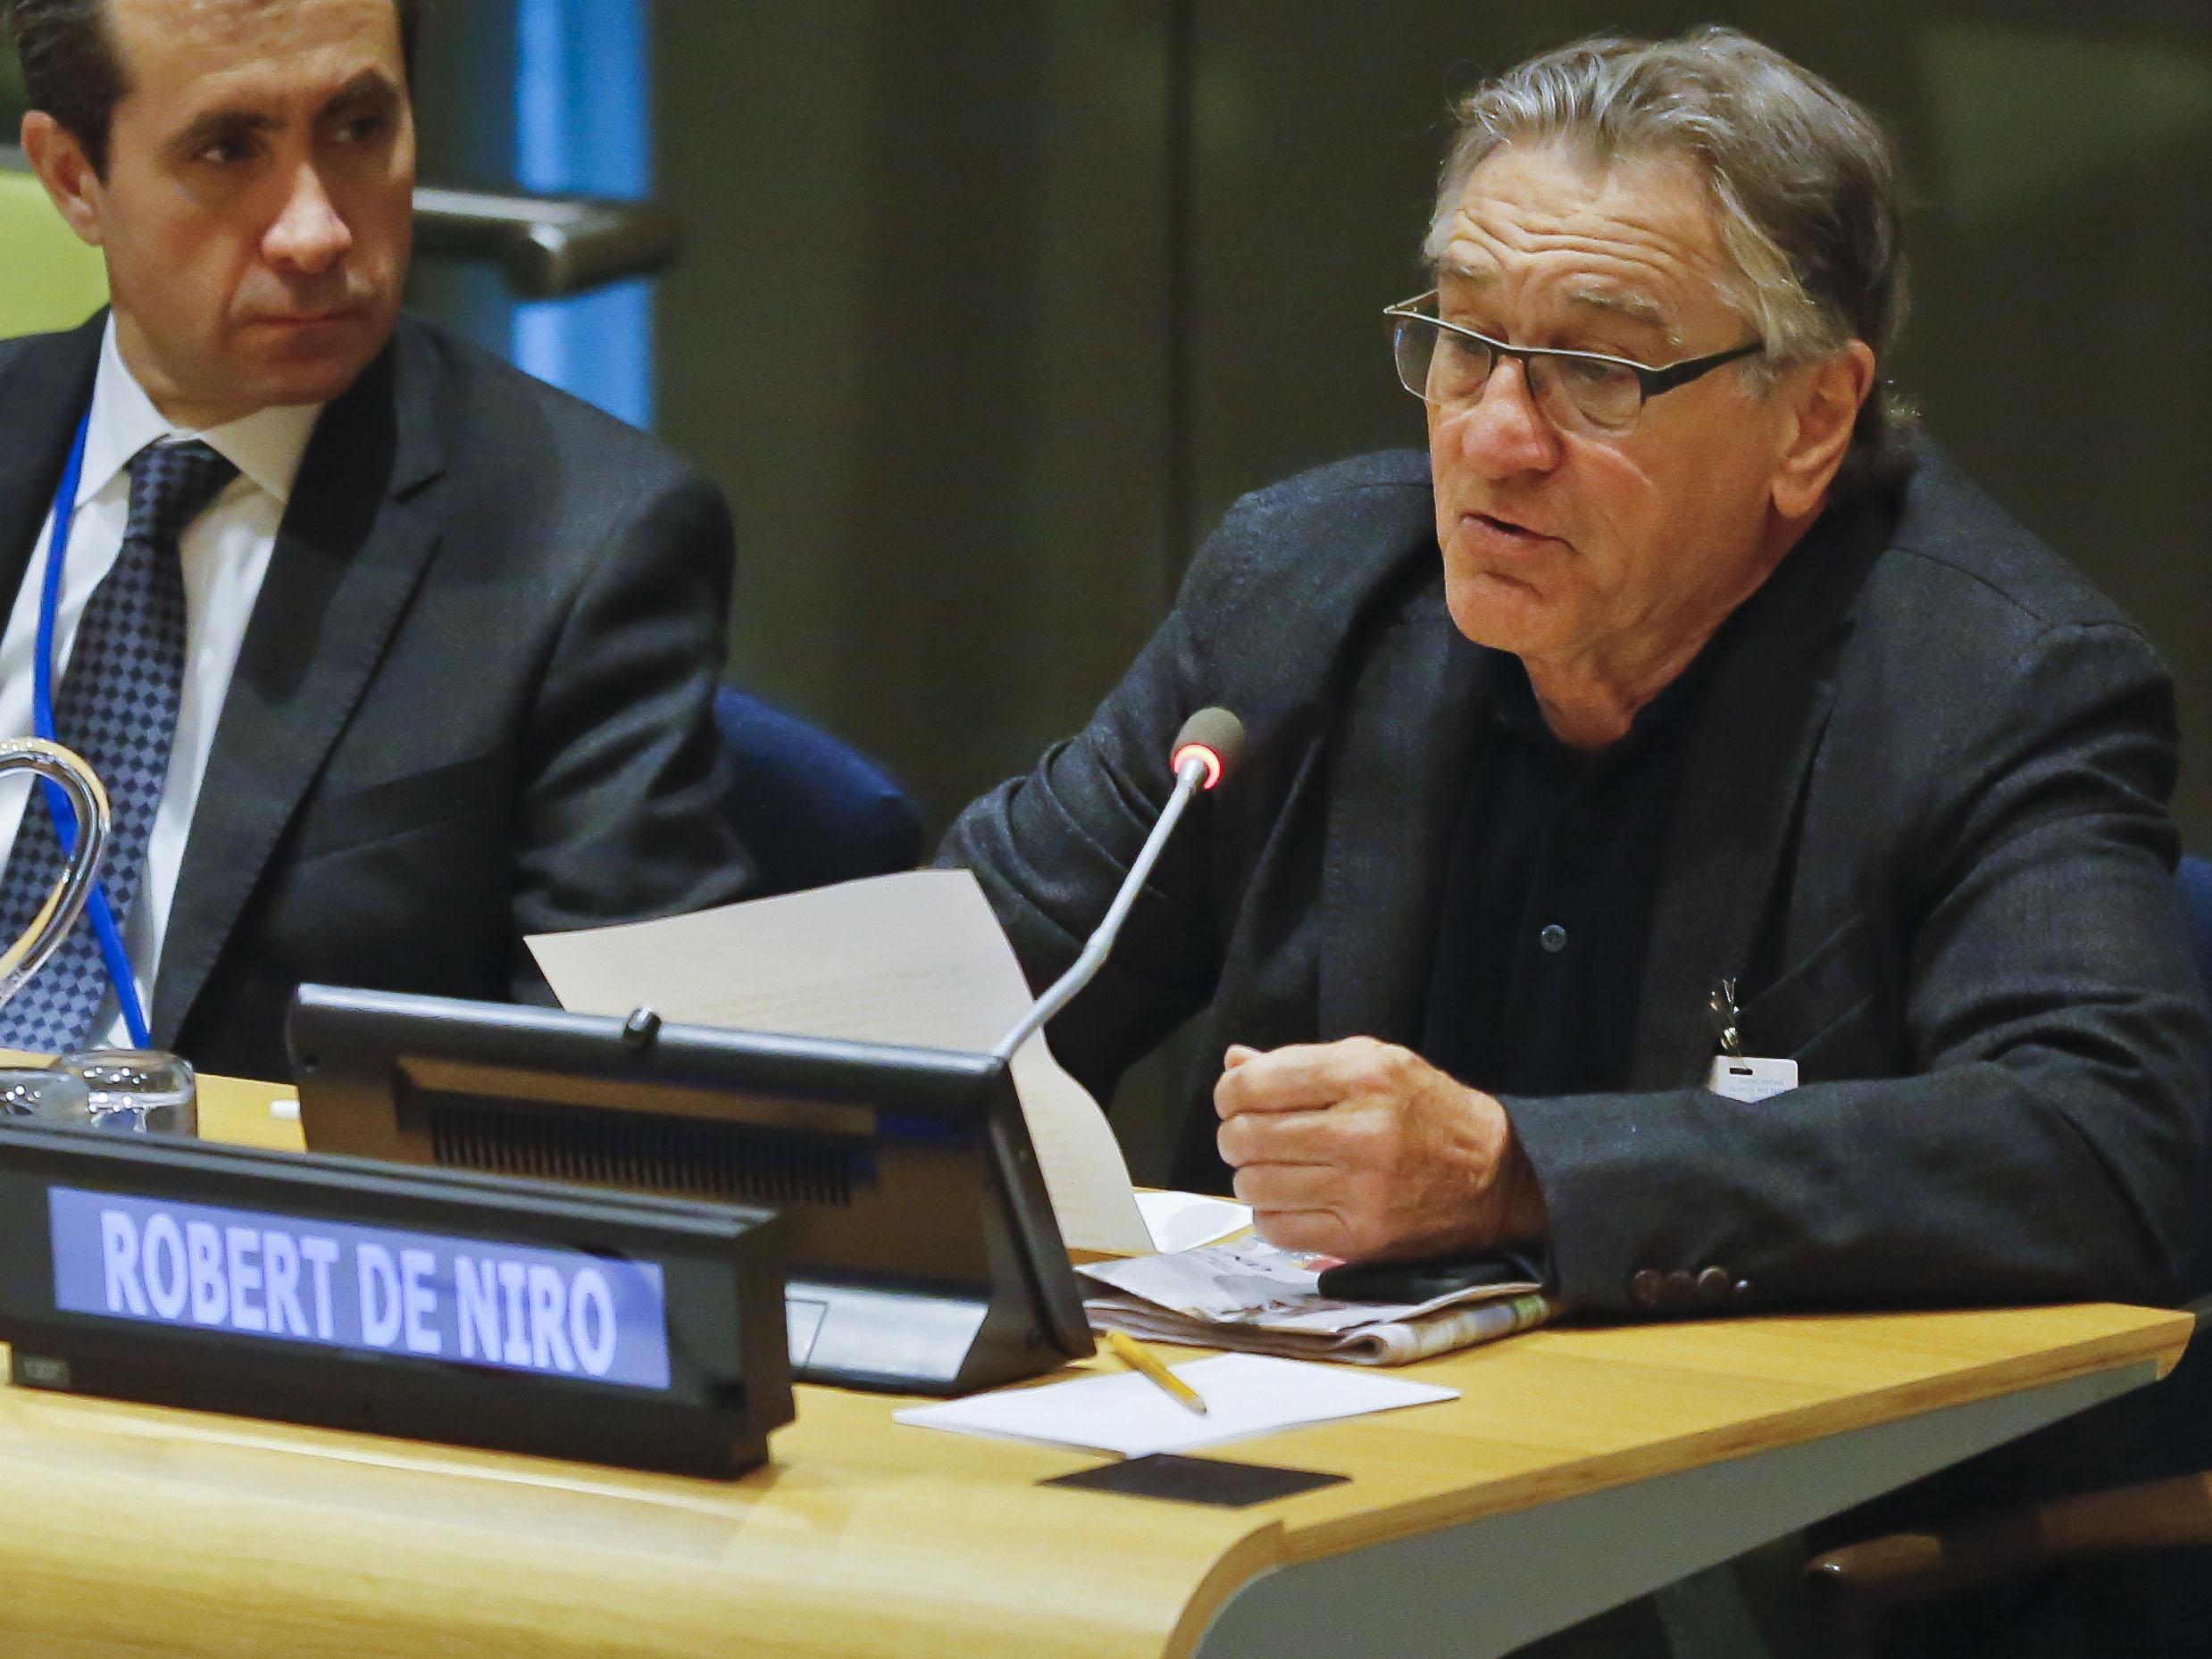 Actor Robert De Niro addresses a high-level meeting on Hurricane Irma at the United Nations headquarters